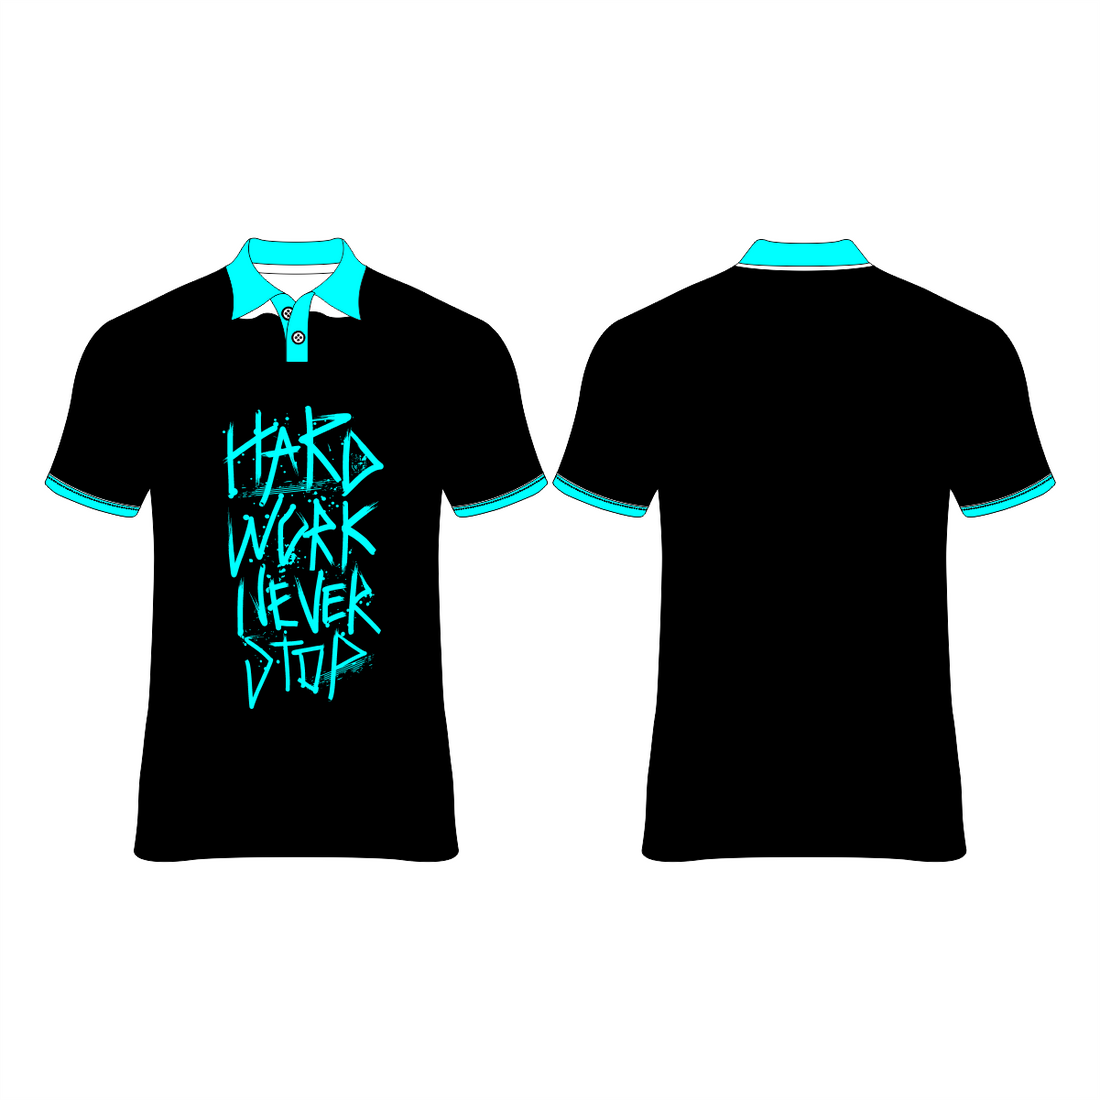 HARD WORK NEVER STOP  PRINTED T-SHIRTS